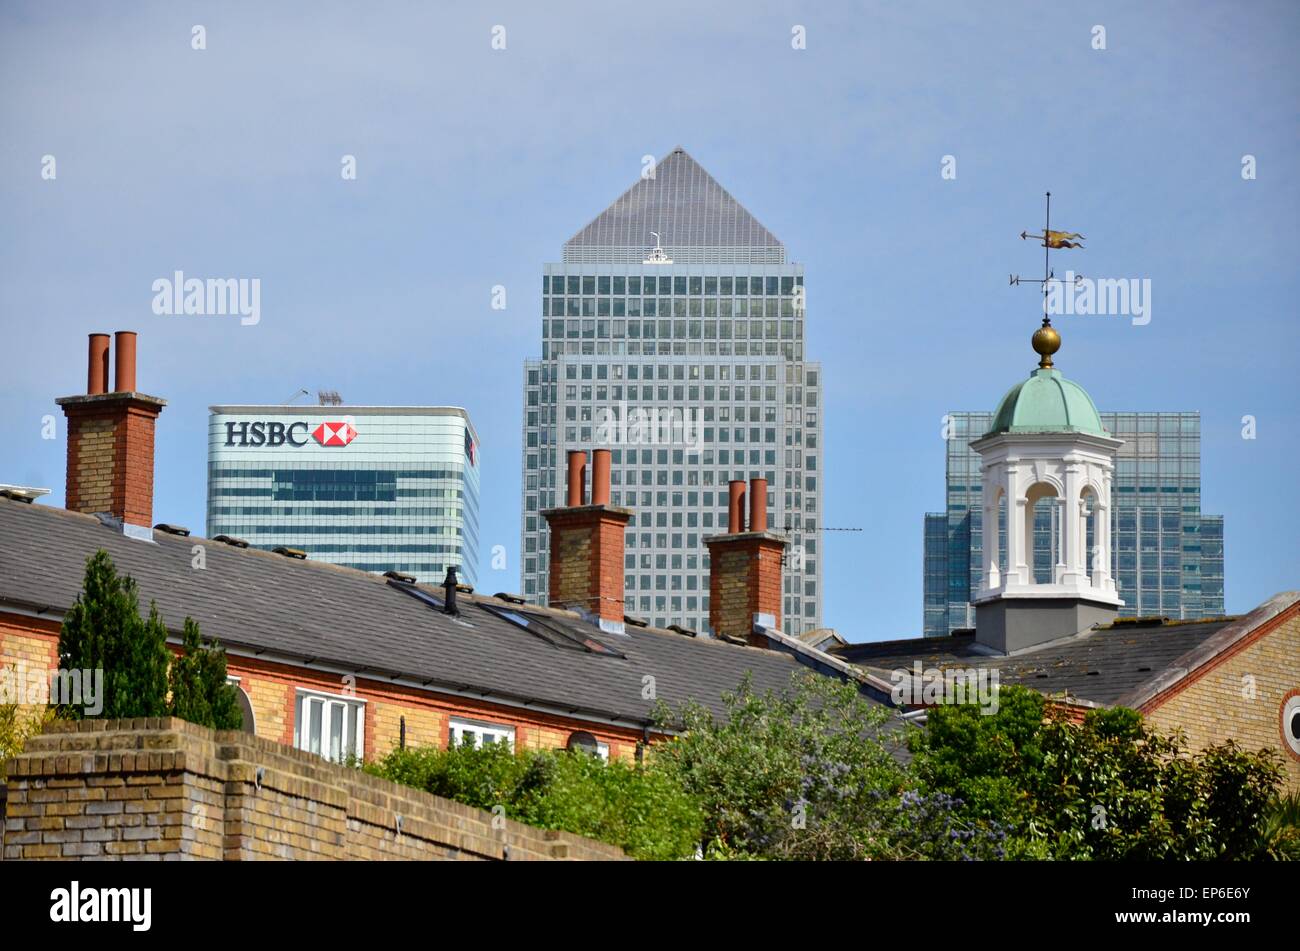 View of the Offices in Canary Wharf from Rotherhithe Street, Rotherhithe, London, England, UK, SE16 Stock Photo